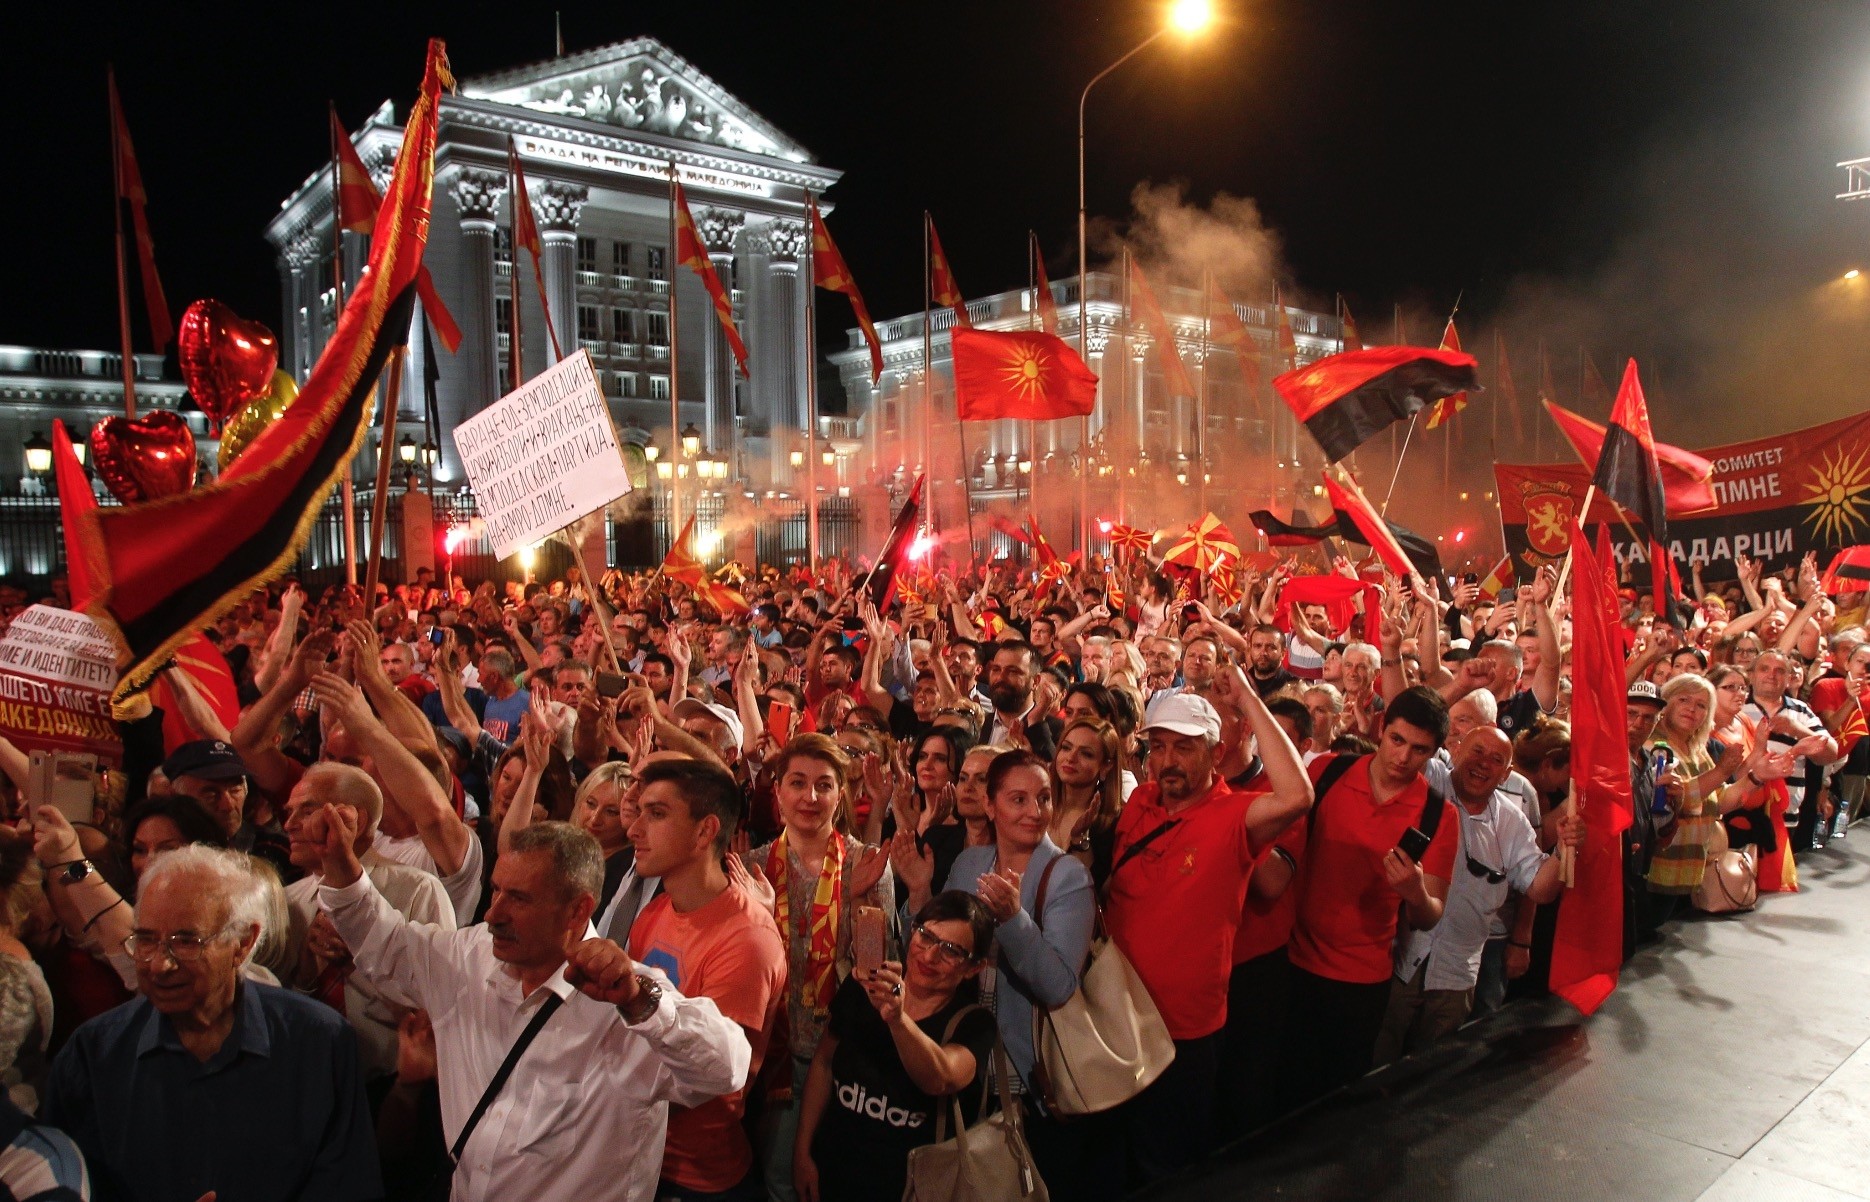 Supporters of the opposition VMRO-DPMNE party protest in front of a government building, Skopje, June 2.